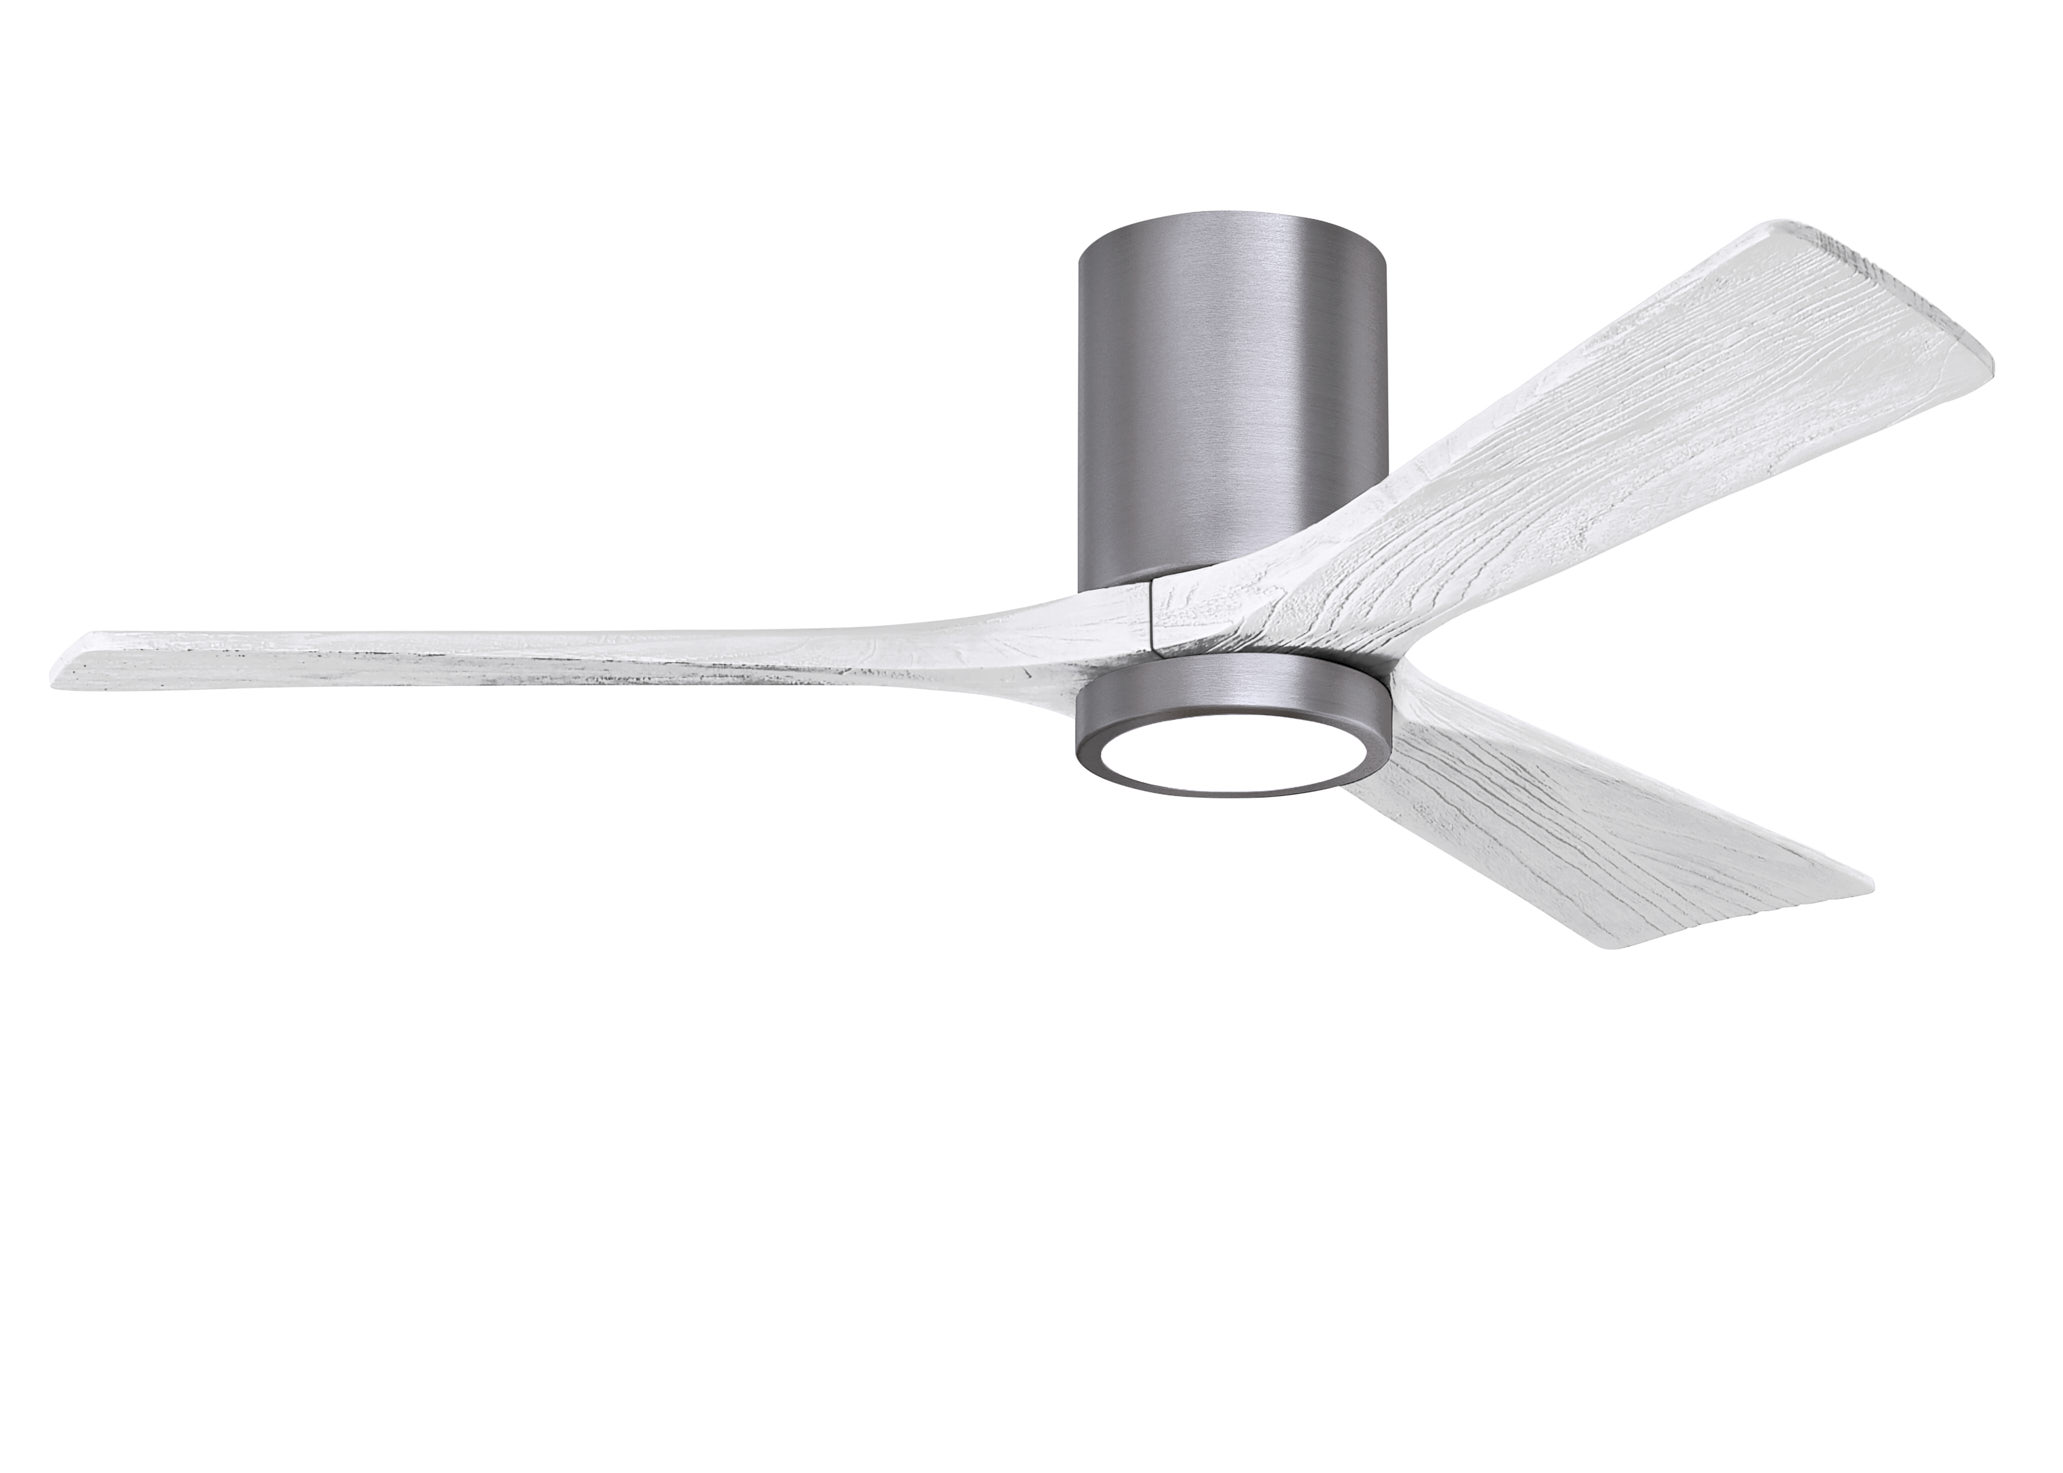 Irene-3HLK 6-speed ceiling fan in brushed pewter finish with 52